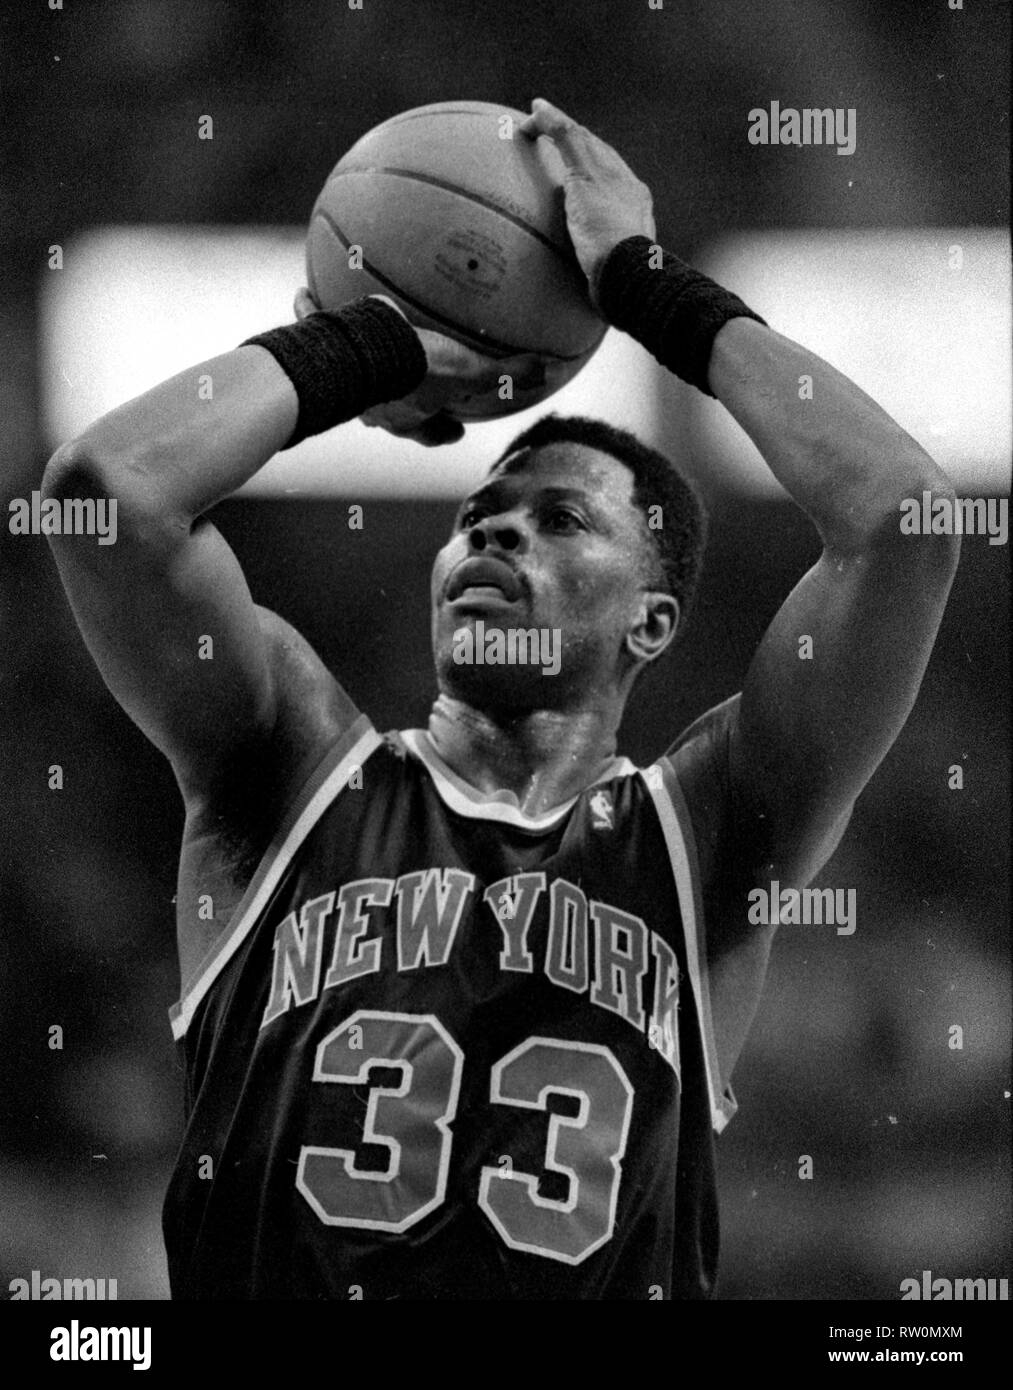 New York Knicks Patrick Ewing at the free throw line during game action against the Boston Celtics at the Fleet Center in Boston Ma USA March 8,1995 photo by bill belknap Stock Photo